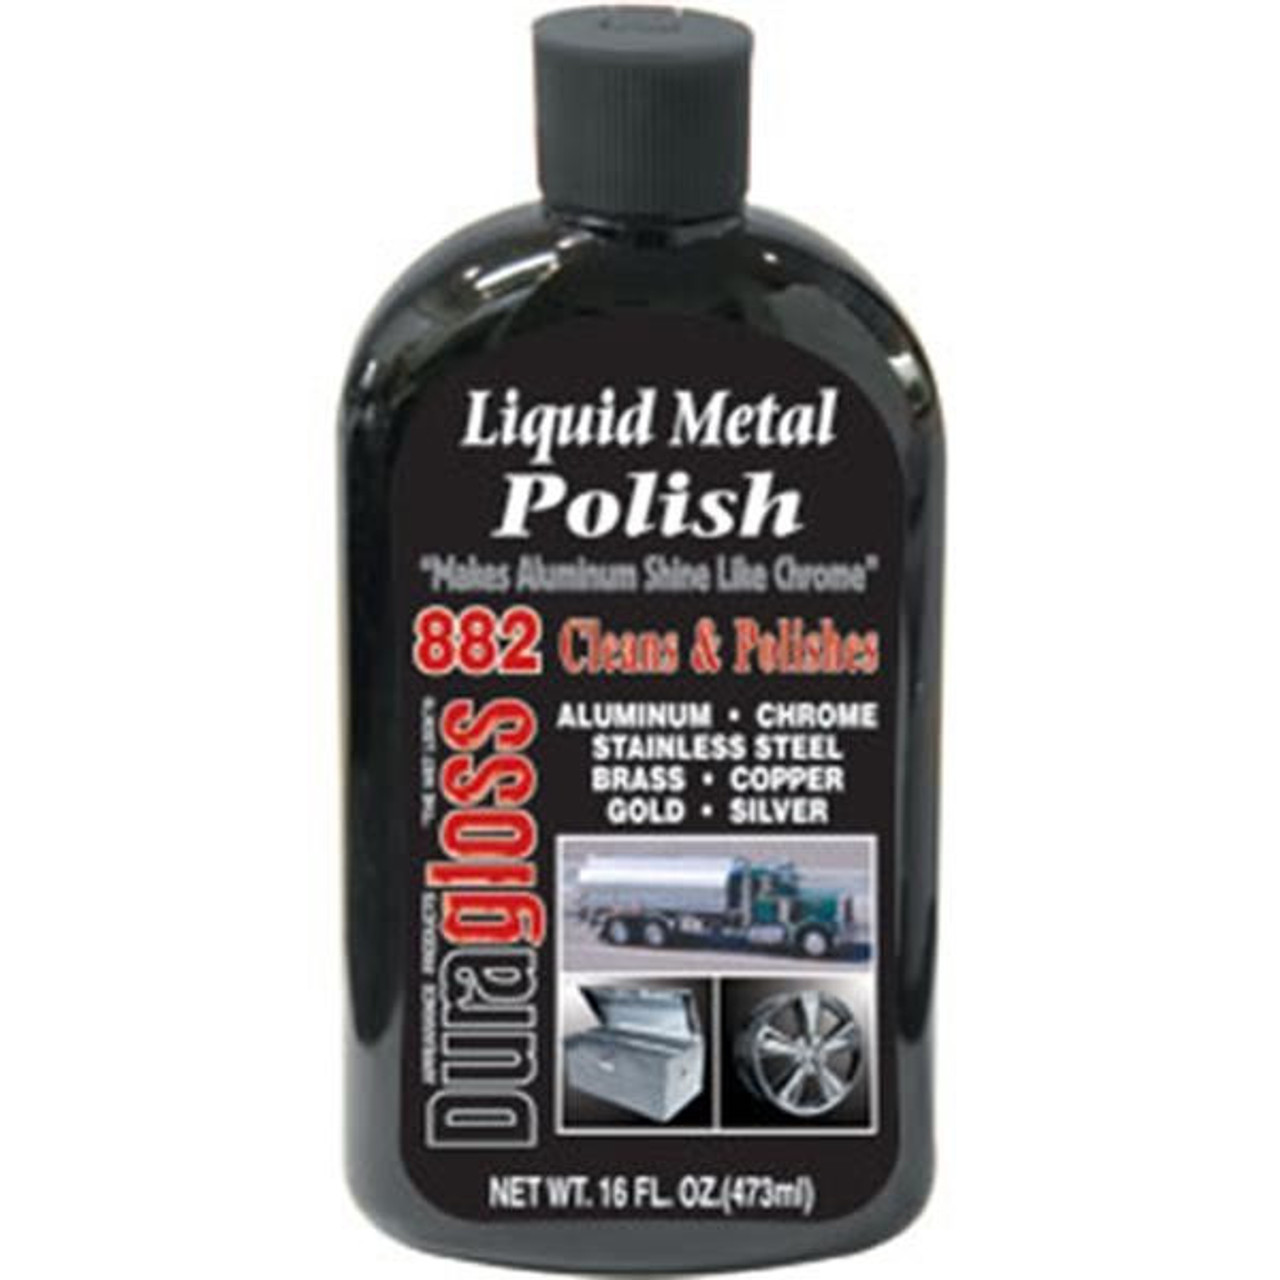 Brass and Copper Metal Cleaning Gel Liquid Review Remove heavy Tarnish  from Brass and Copper Metal 